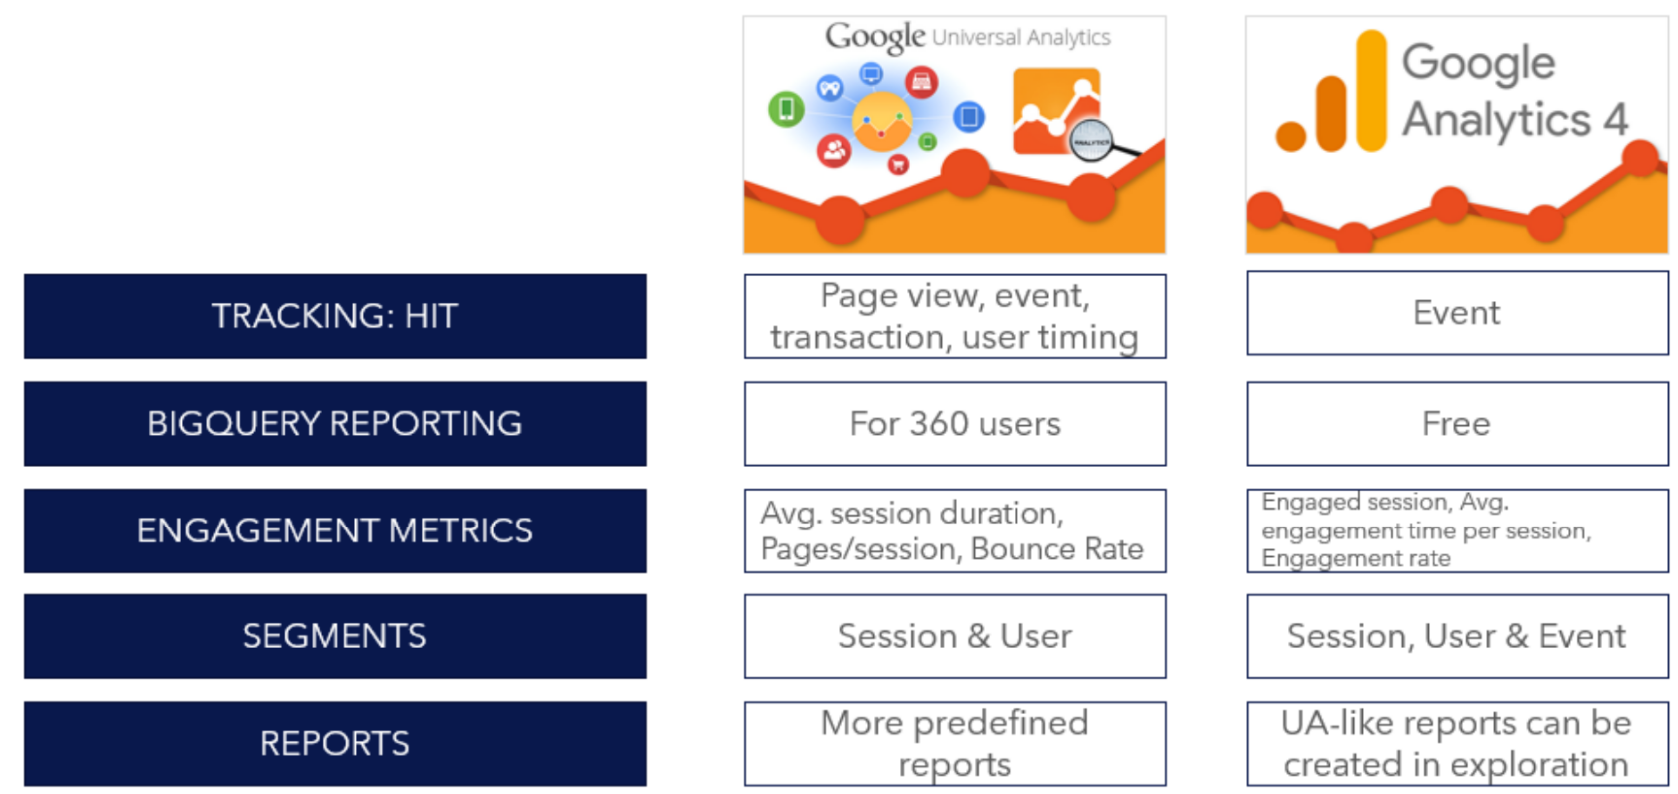 A comparison of features between Universal Analytics and Google Analytics 4 (GA4)